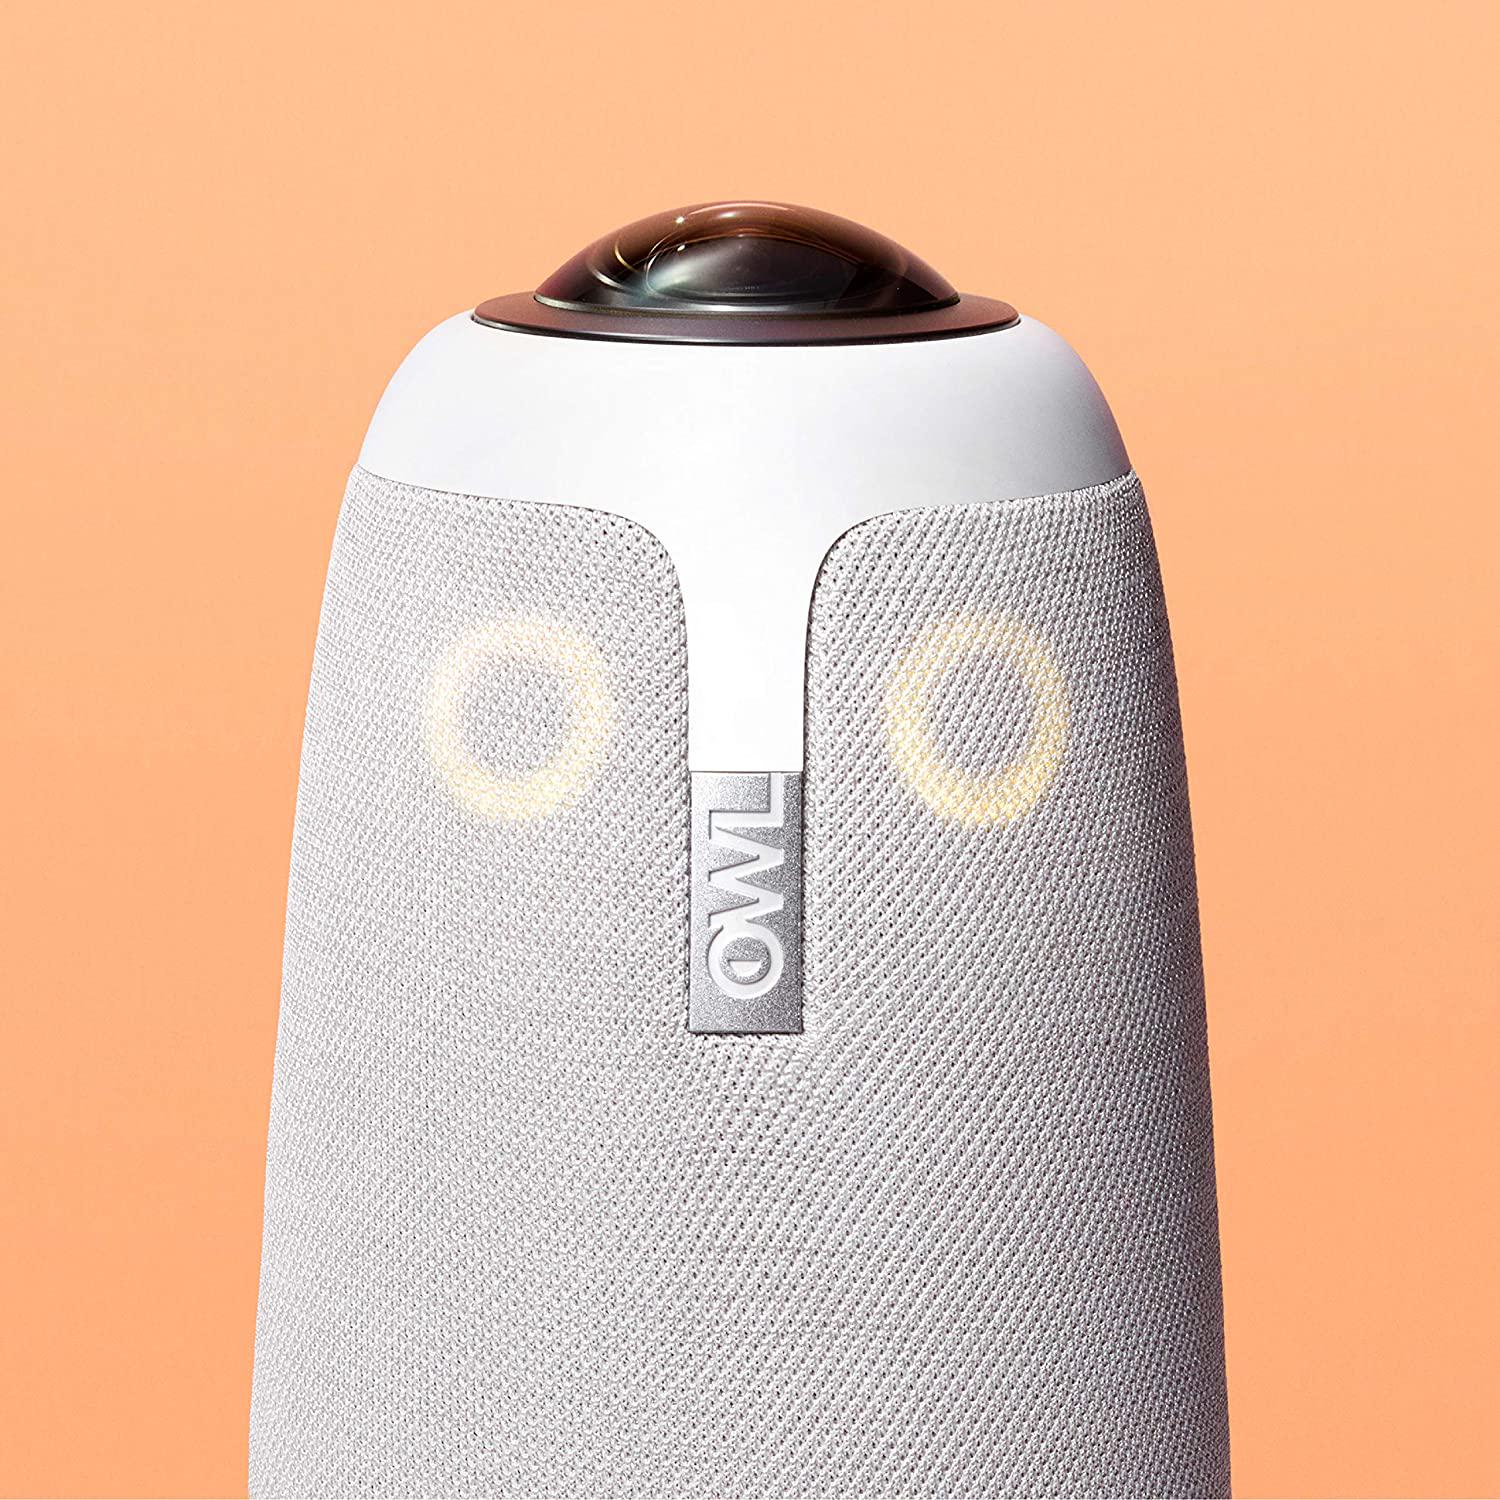 Owl Labs, Meeting Owl Pro - 360-Degree, 1080p HD Smart Video Conference Camera, Microphone, and Speaker (Automatic Speaker Focus and Smart Zooming and Noise Equalising) - Works with Zoom, MS Teams, Slack and more